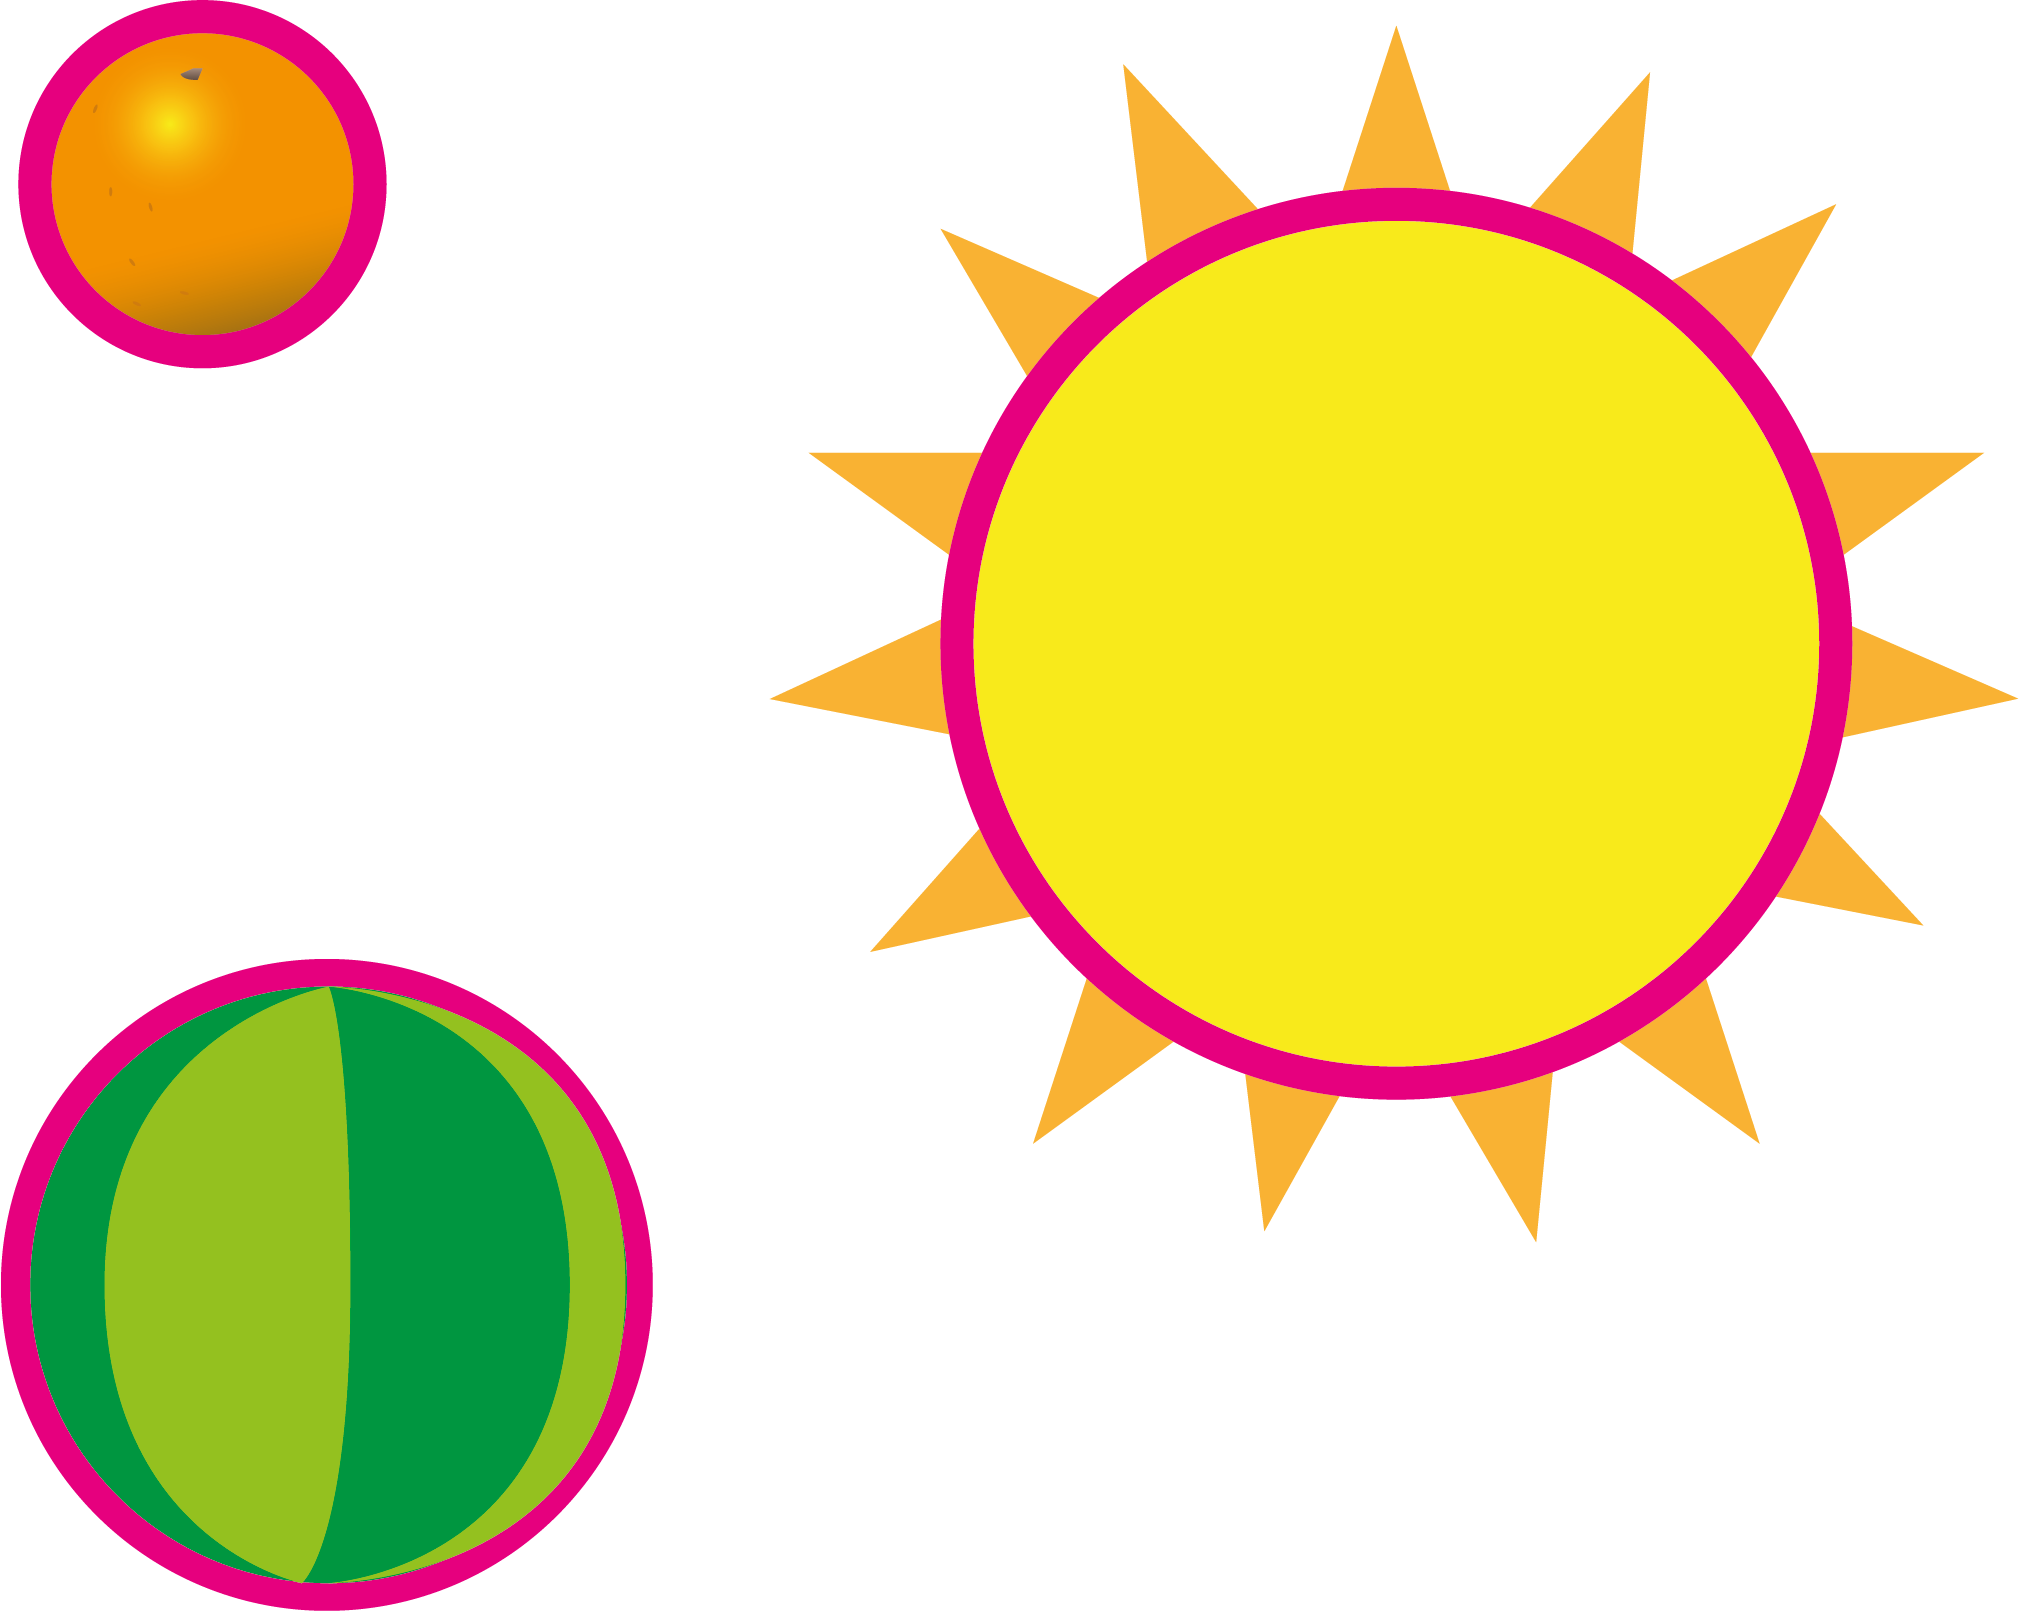 Planet, sun and moon